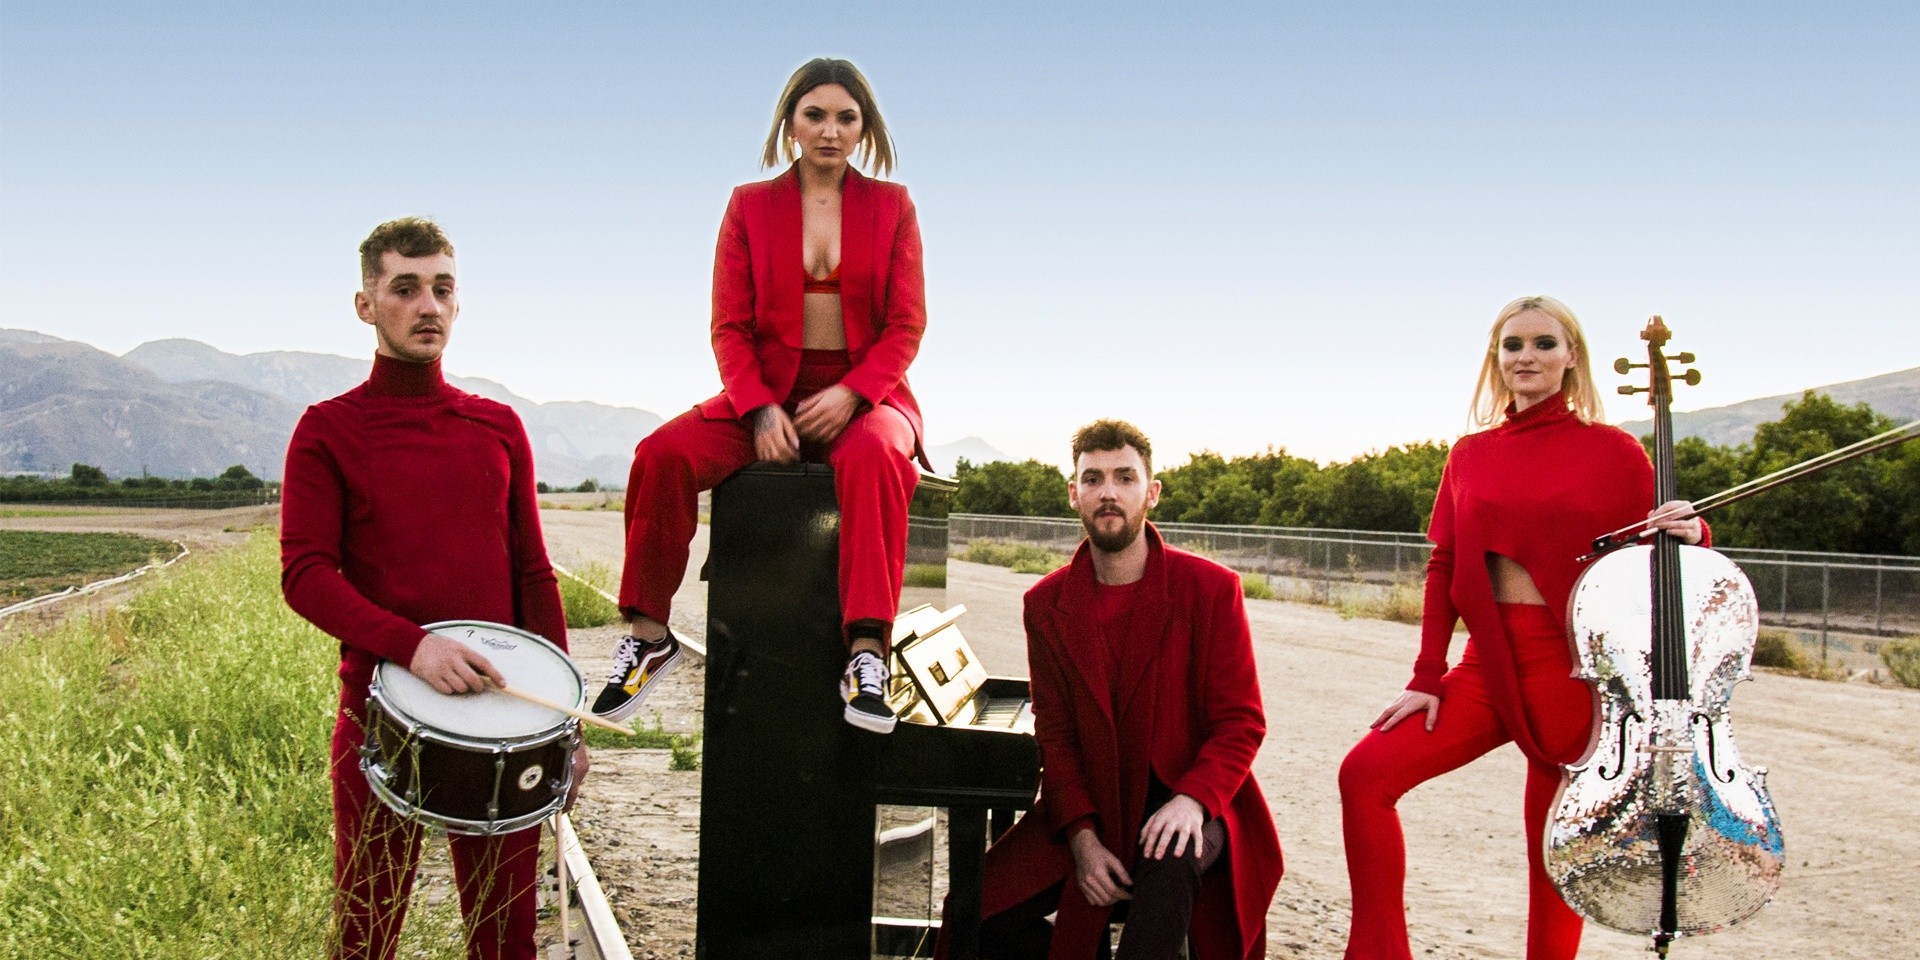 Clean Bandit confirm new date for previously postponed Singapore show